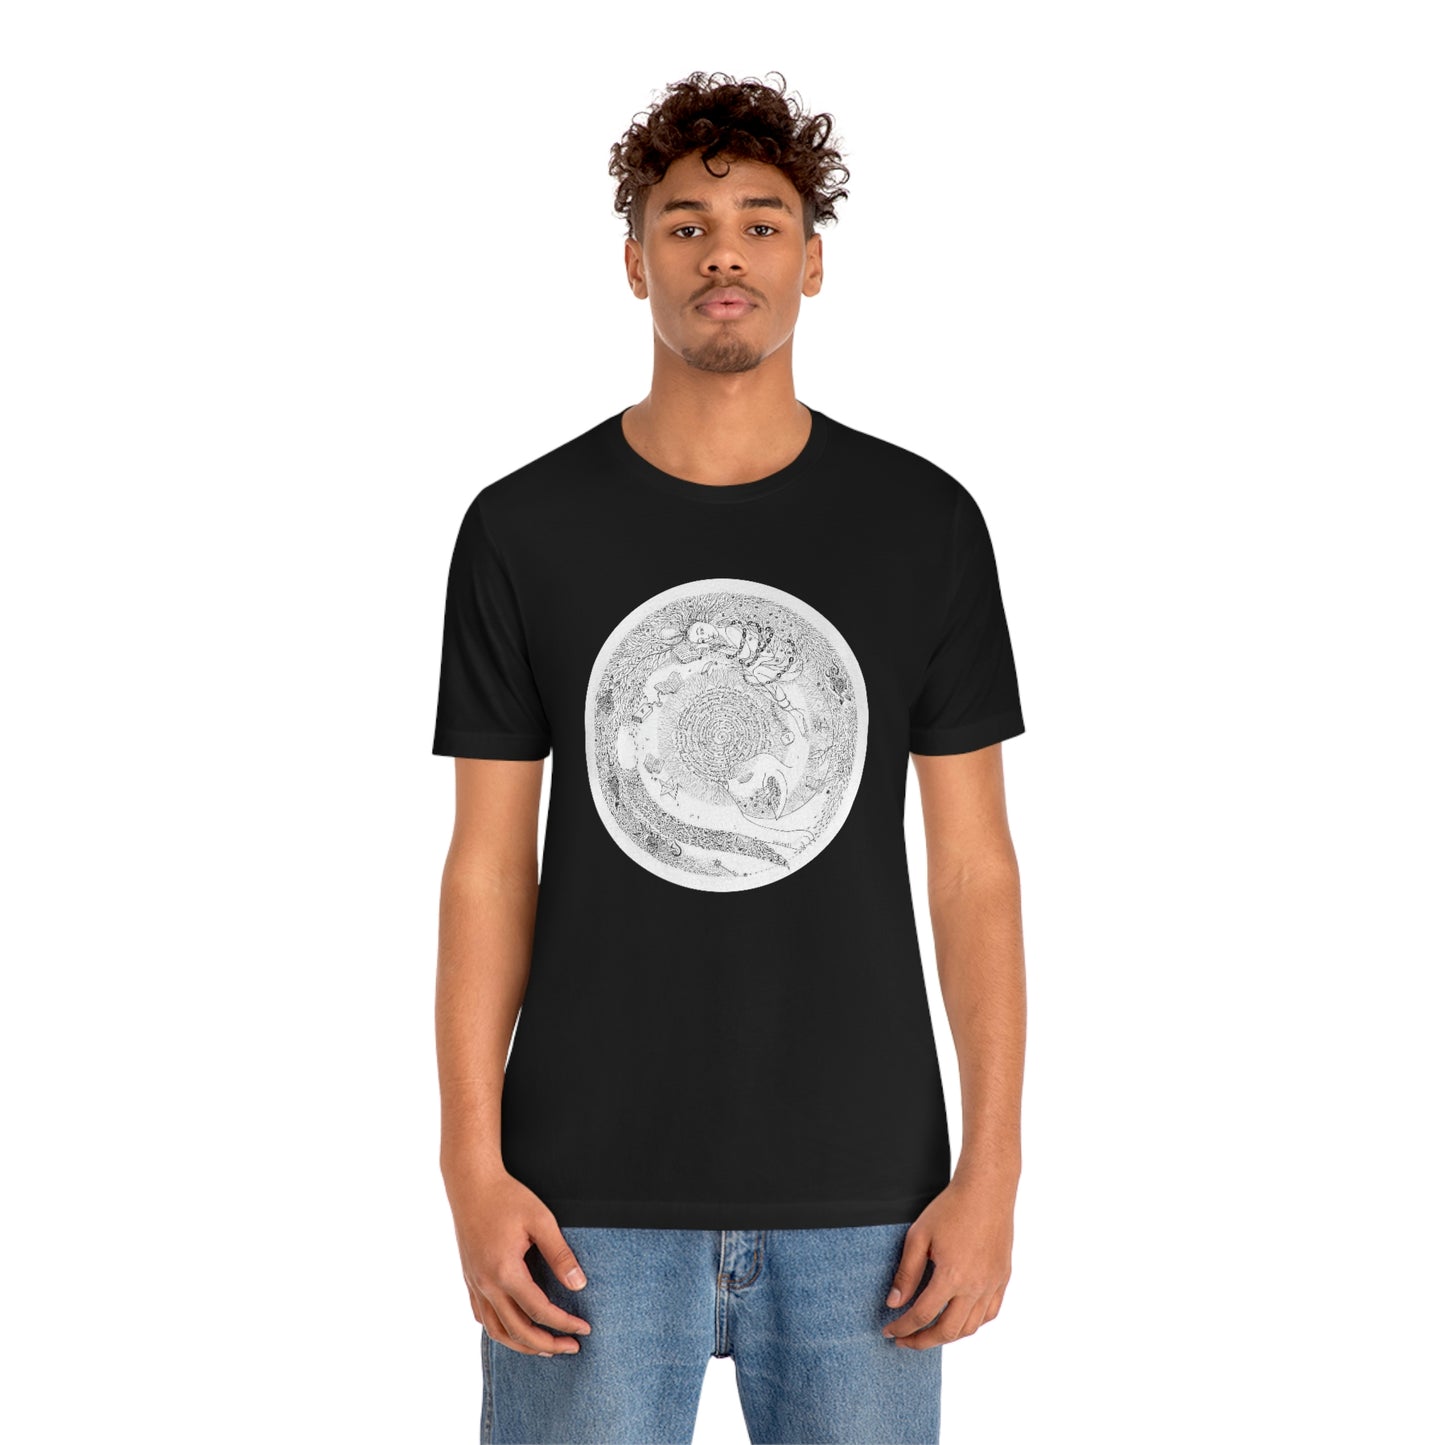 Chinese Zodiac Sign T Shirt (Cat) Unisex Regular Fit Limited Edition